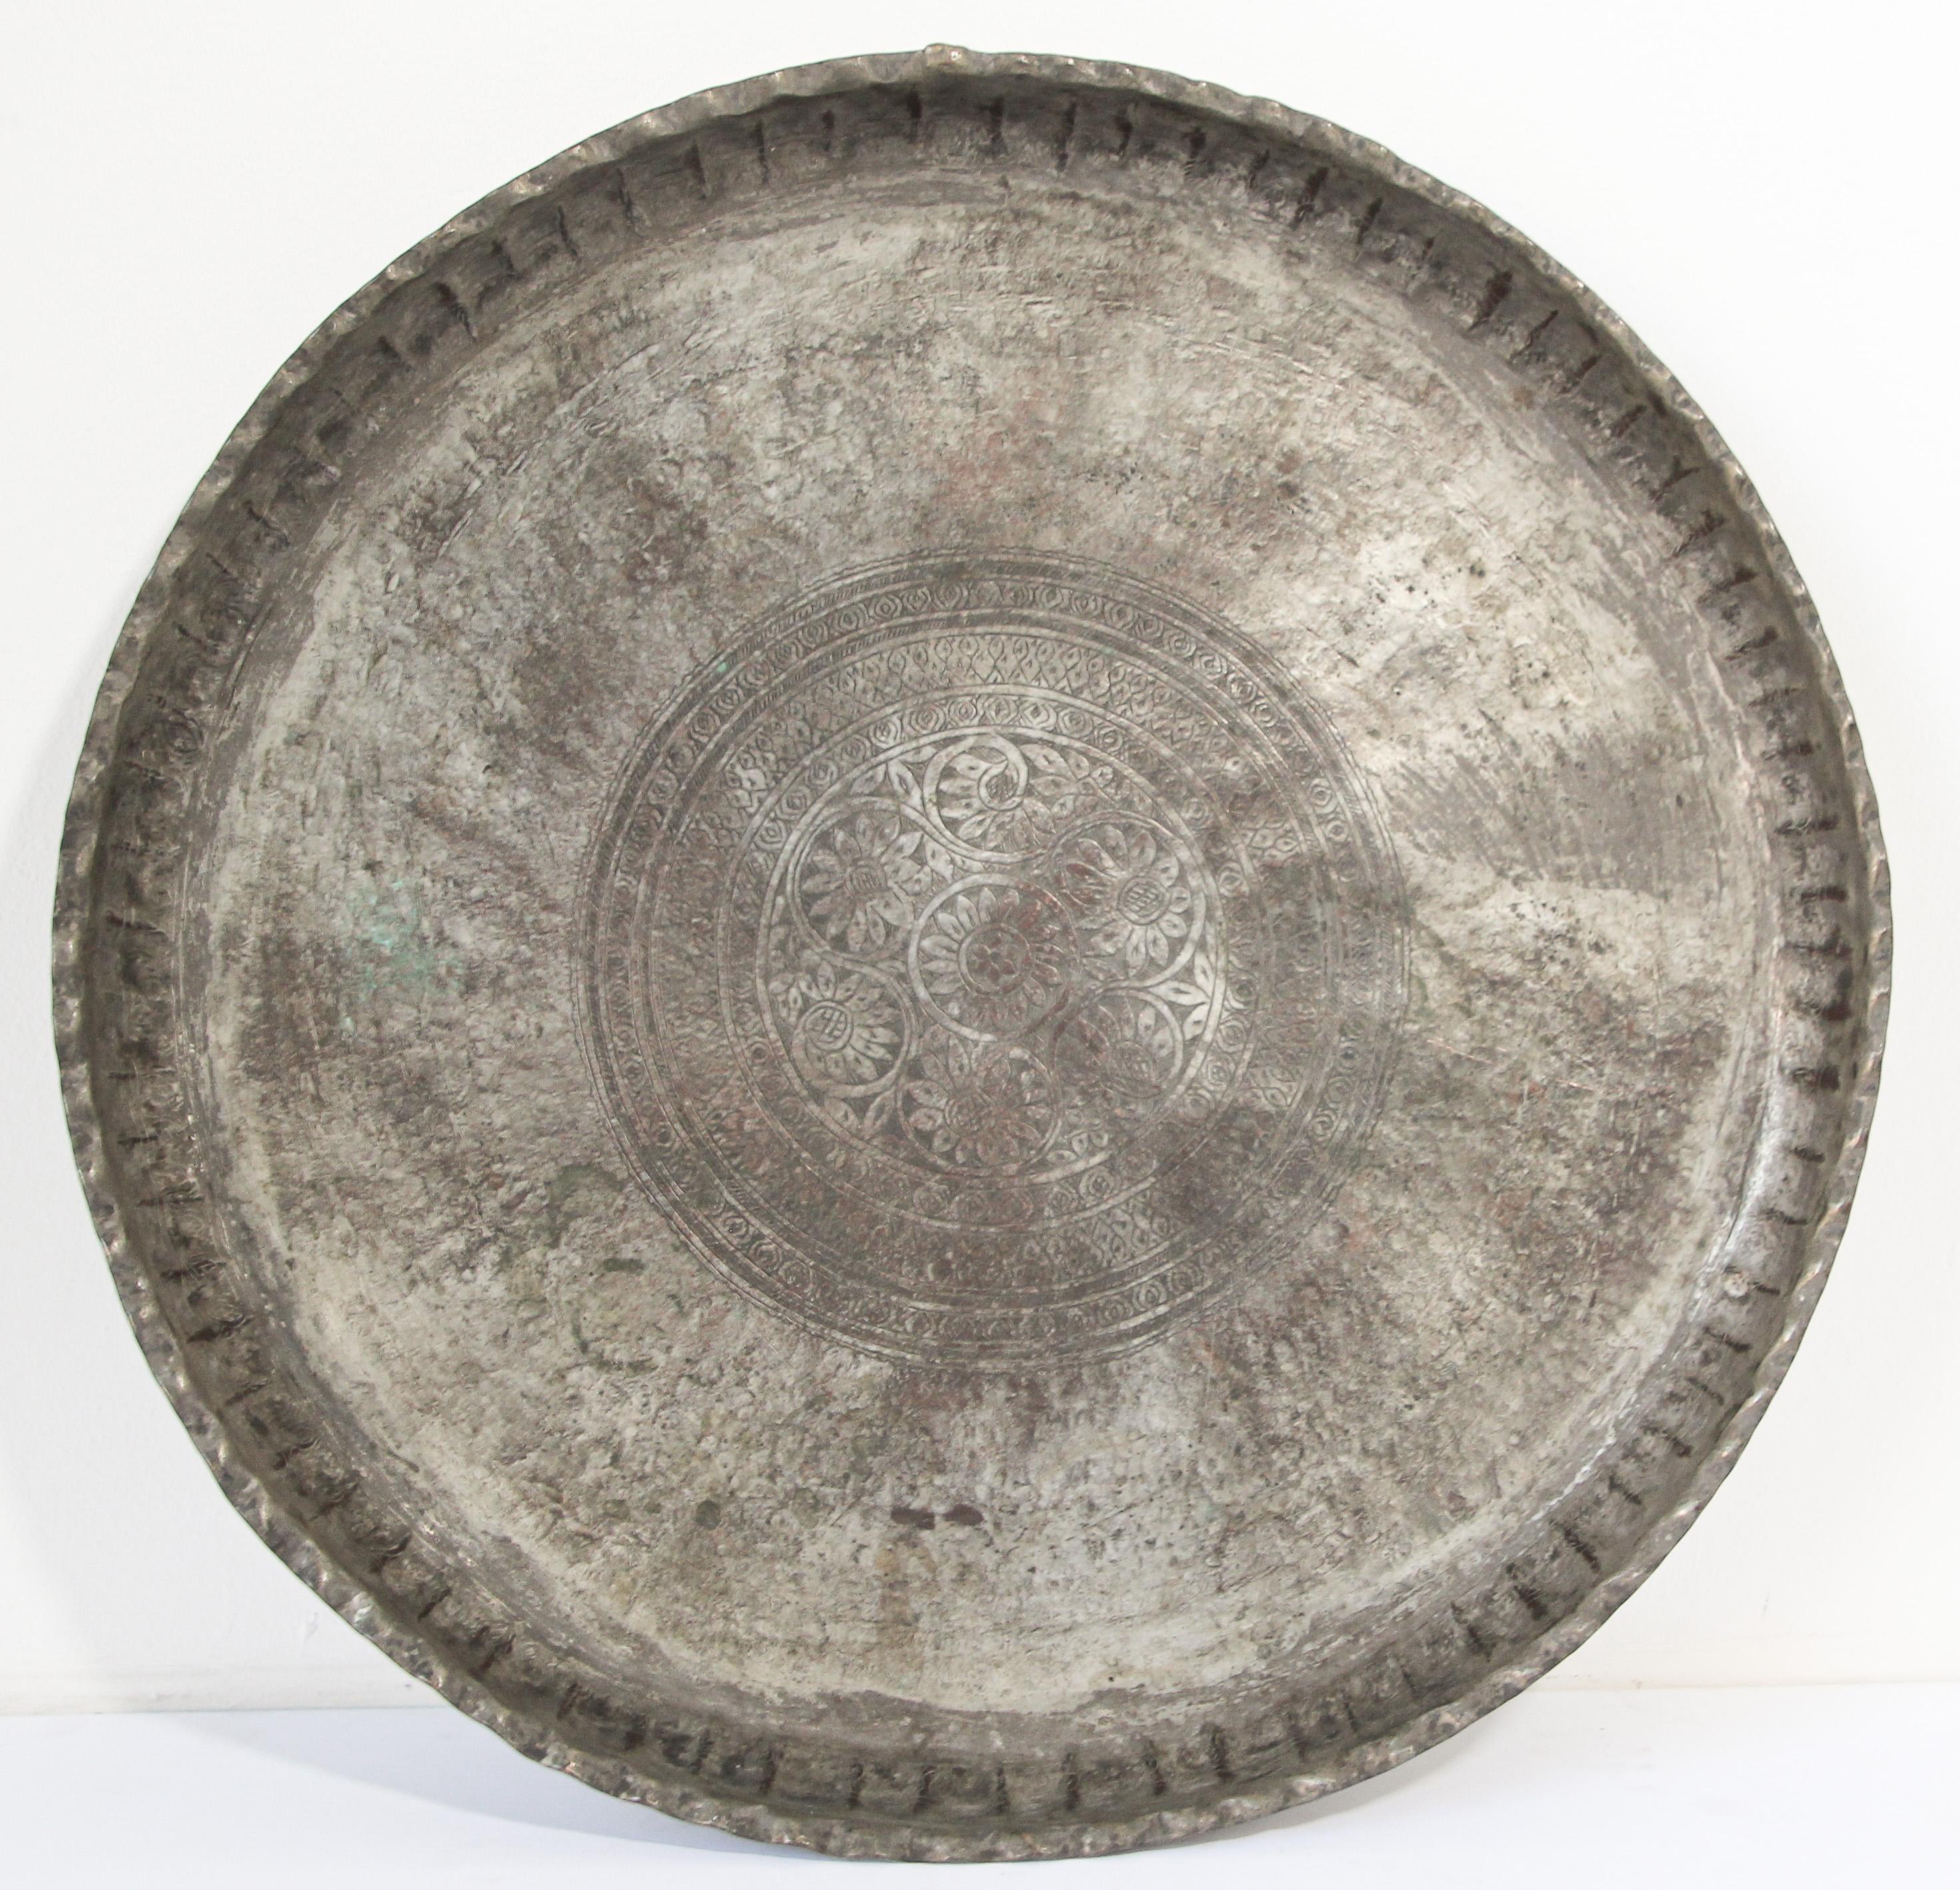 A large-scale 19th century Moorish Turkish Asian tin copper round tray platter.. 
With deeply scalloped hand-hammered edge, with intricate incised geometric decoration, floral arabesques spiraling from the centre,
Antique Turkish tinned copper